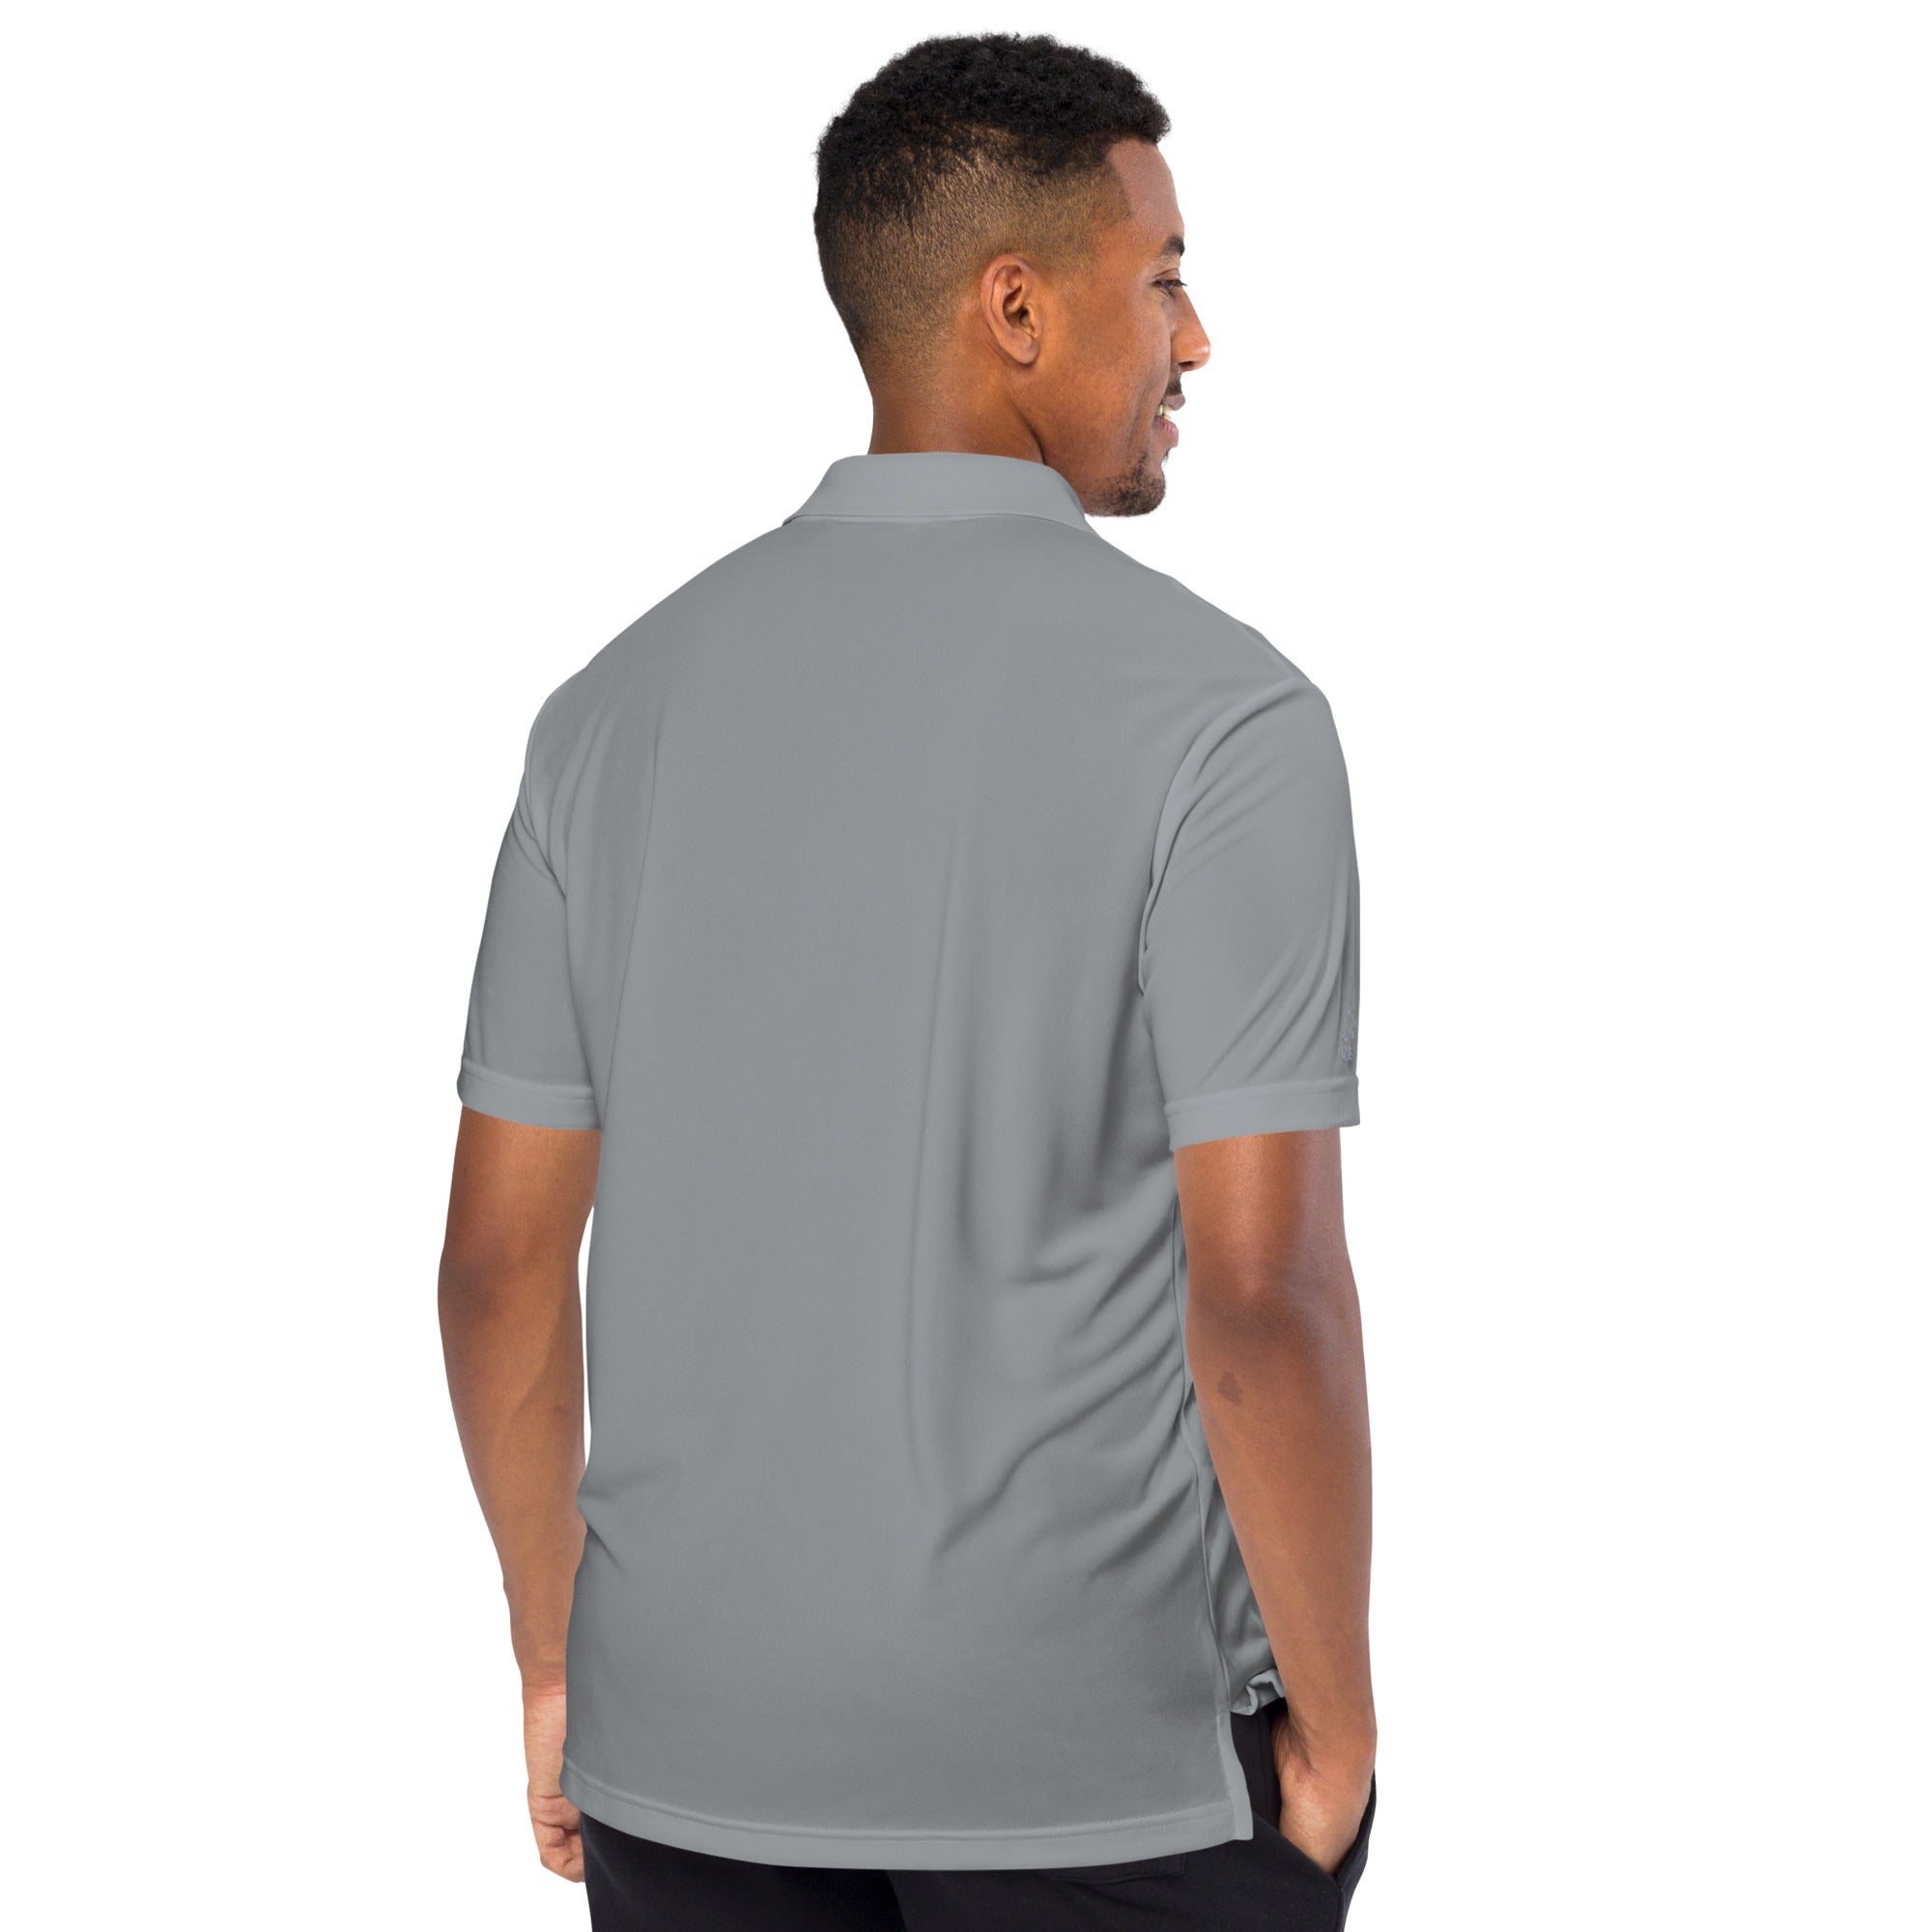 "The Outlier Project" adidas performance polo shirt